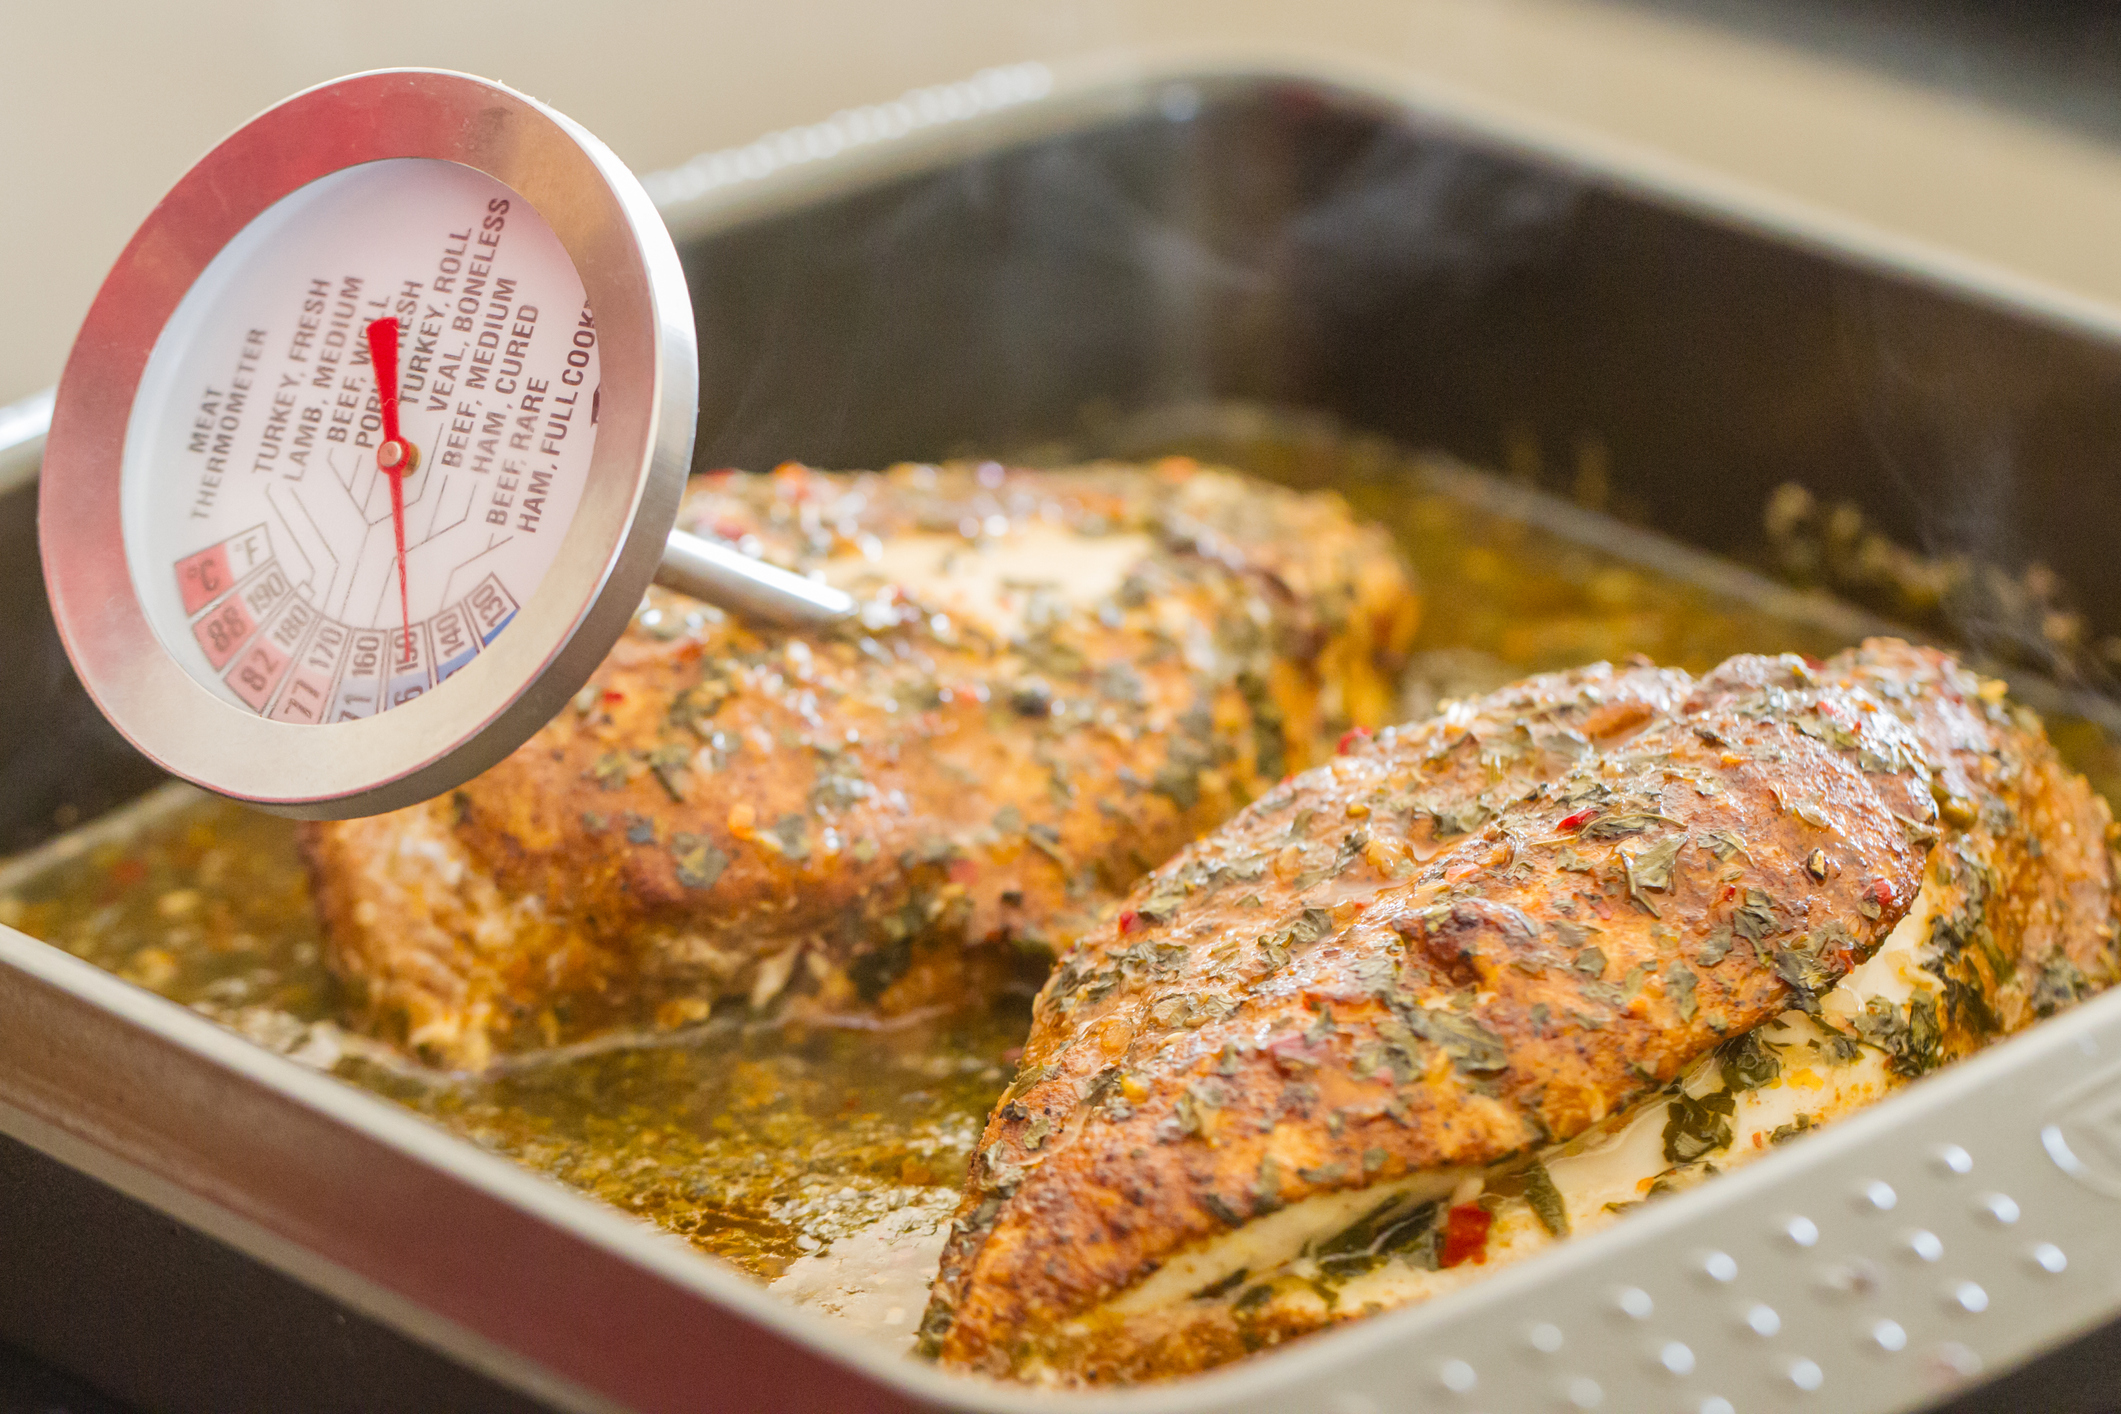 The temperature being measured of two seasoned chicken breasts in a baking tray. (Photo: iStock - CBCK-Christine)